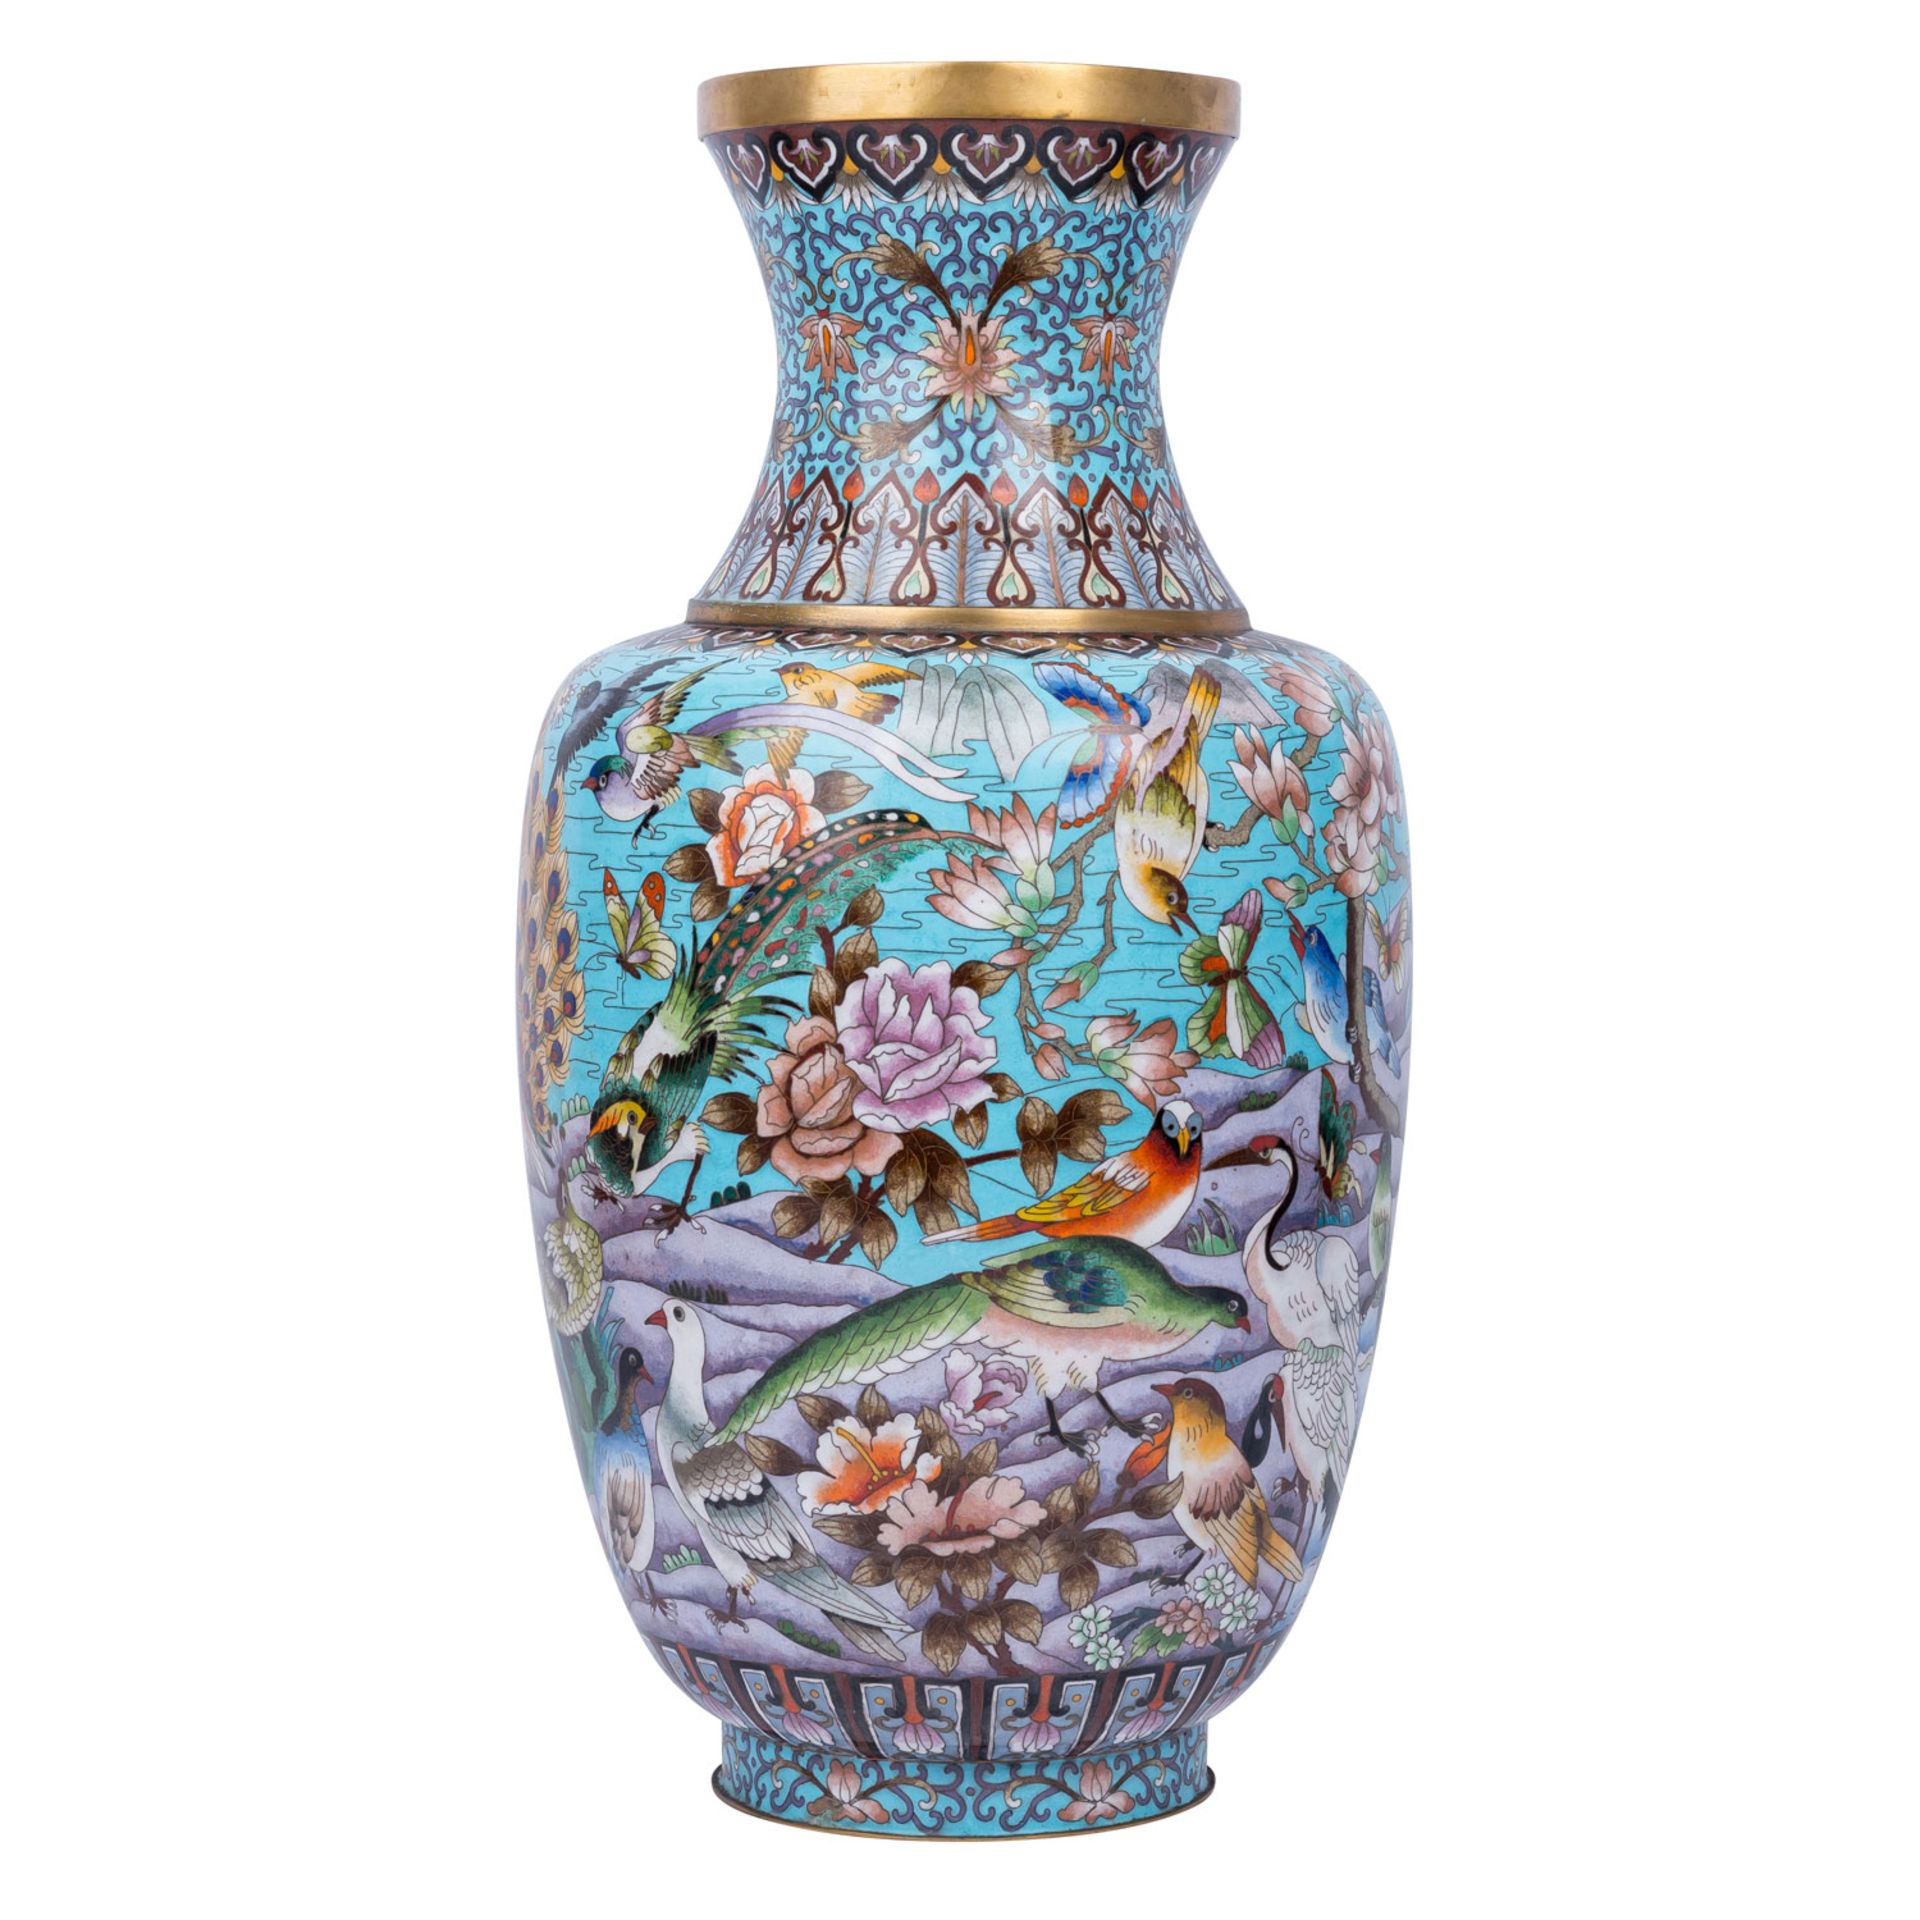 Cloisonné-Bodenvase. CHINA, 20. Jh., - Image 4 of 9